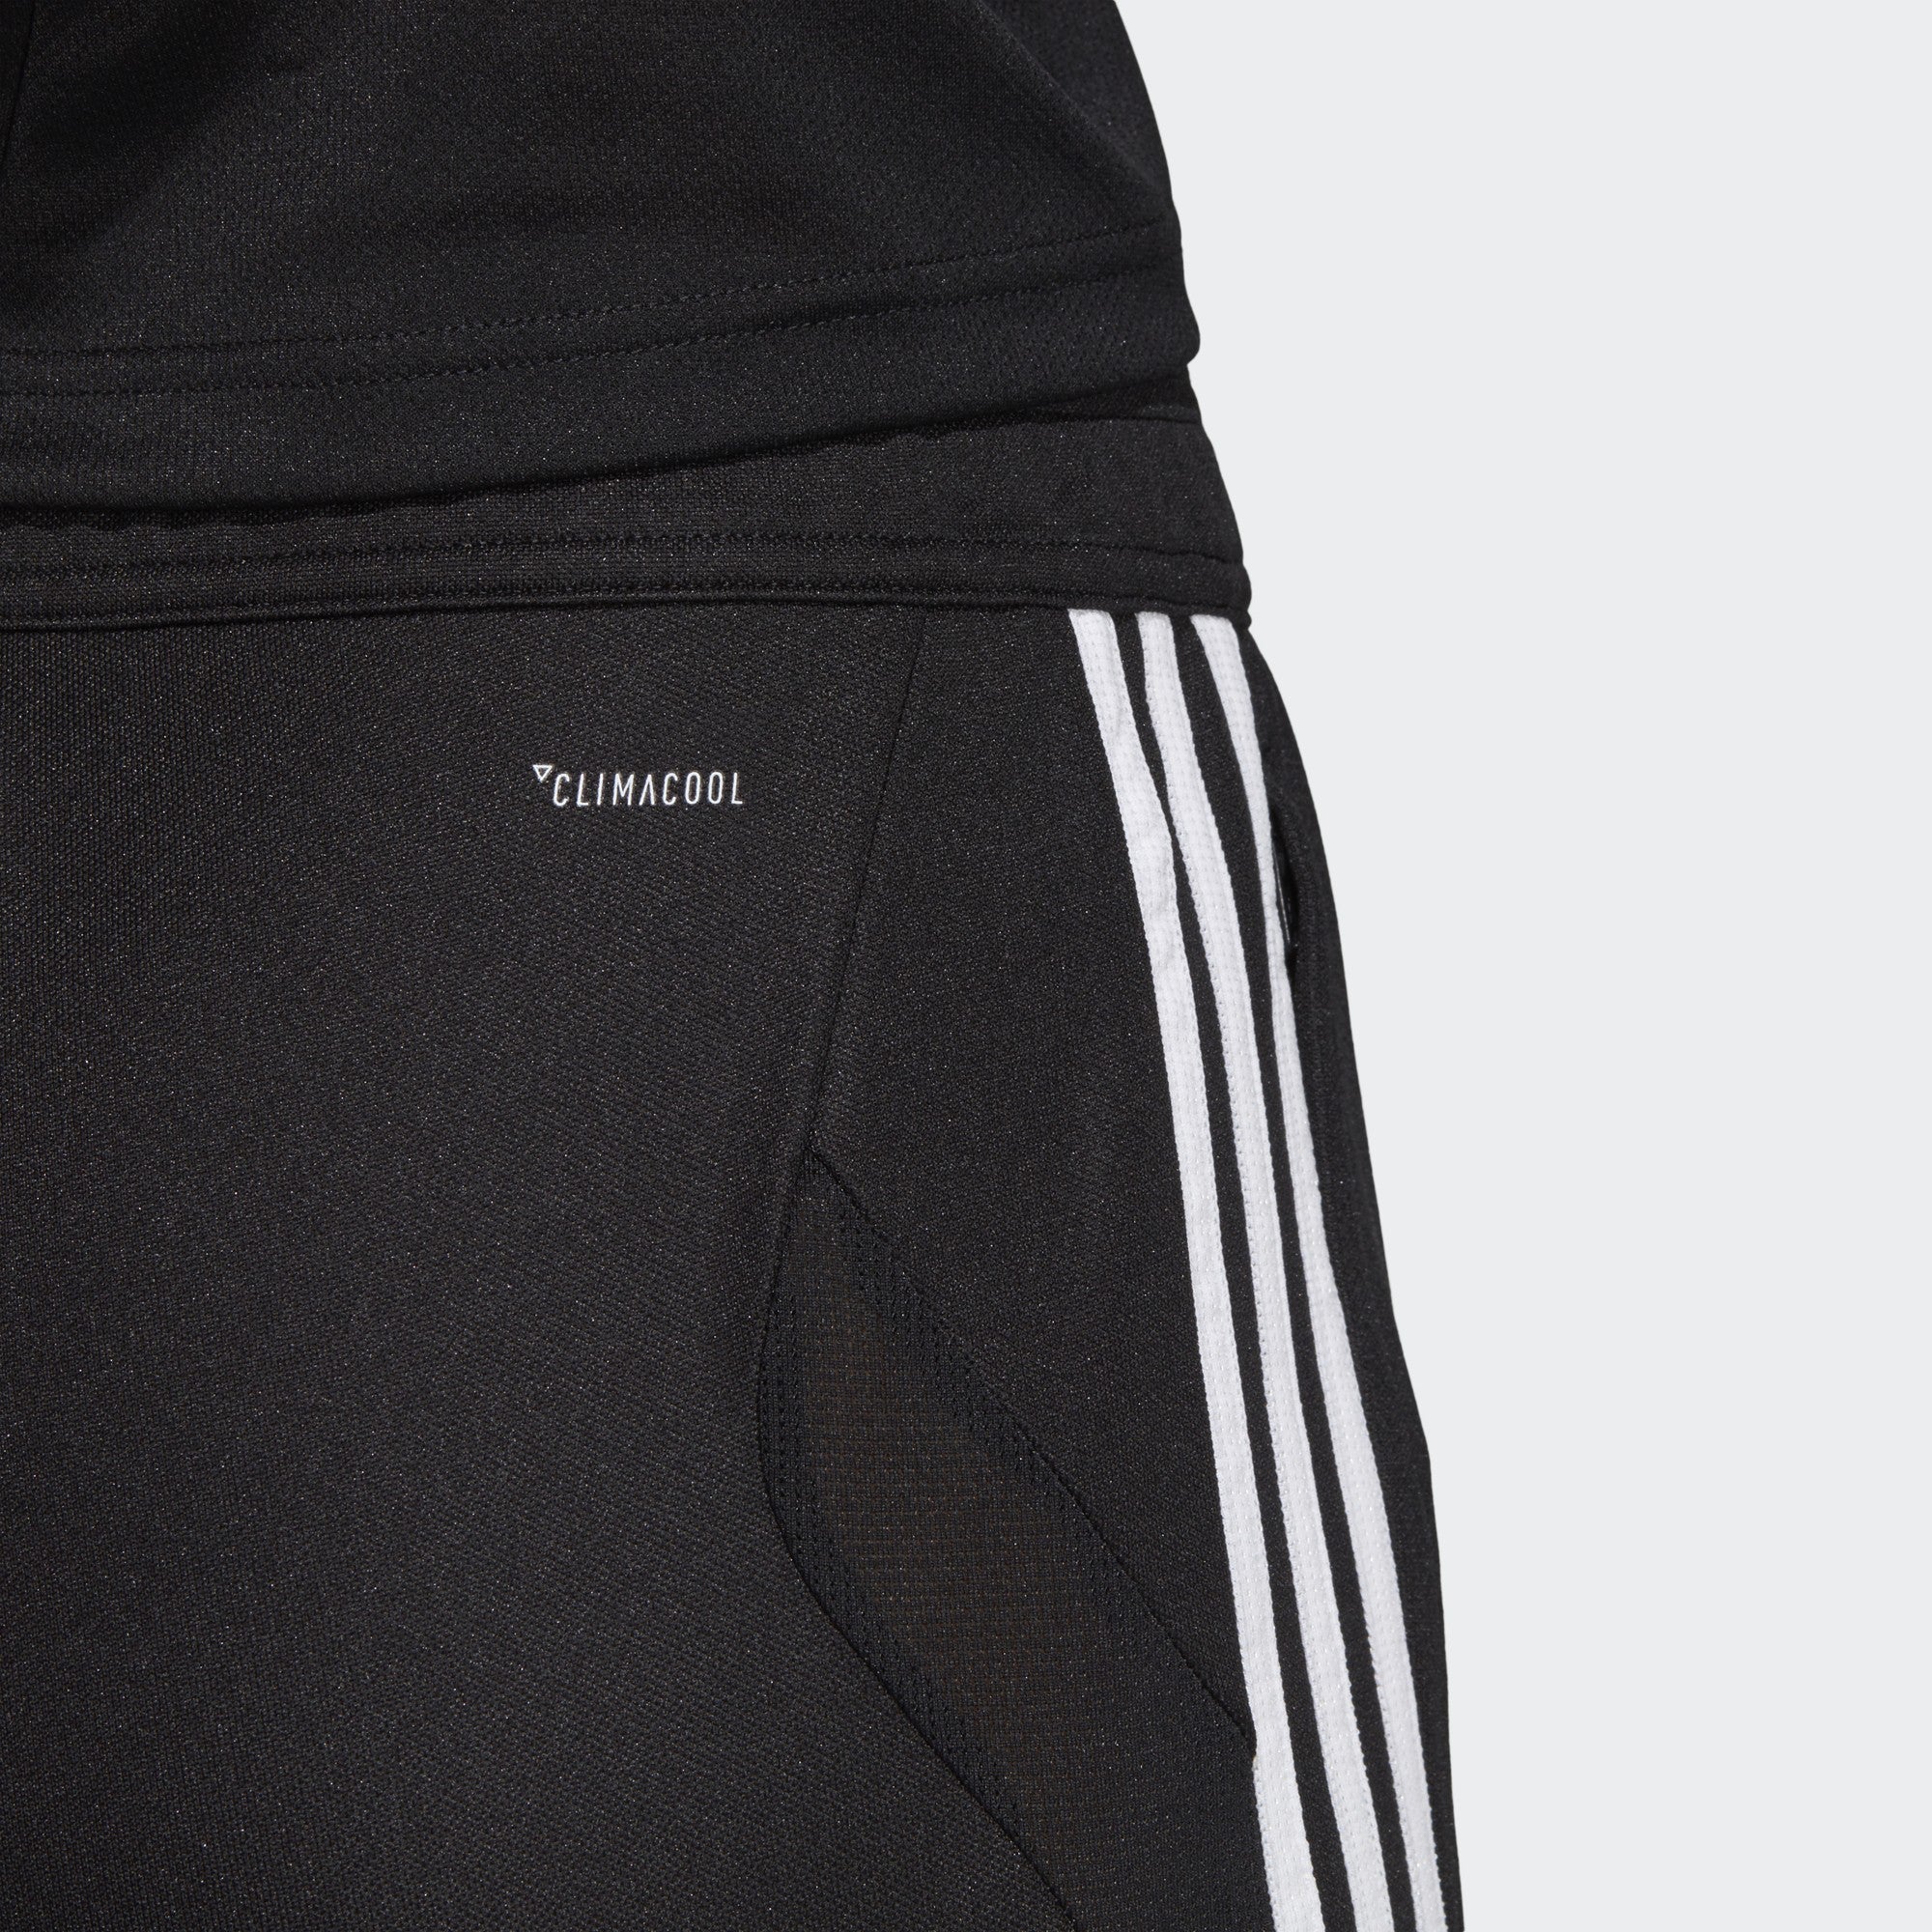 ADIDAS CLIMACOOL BOYS YOUTH X-SMALL ATHLETIC SOCCER SWEAT PANTS BLACK &  WHITE | eBay